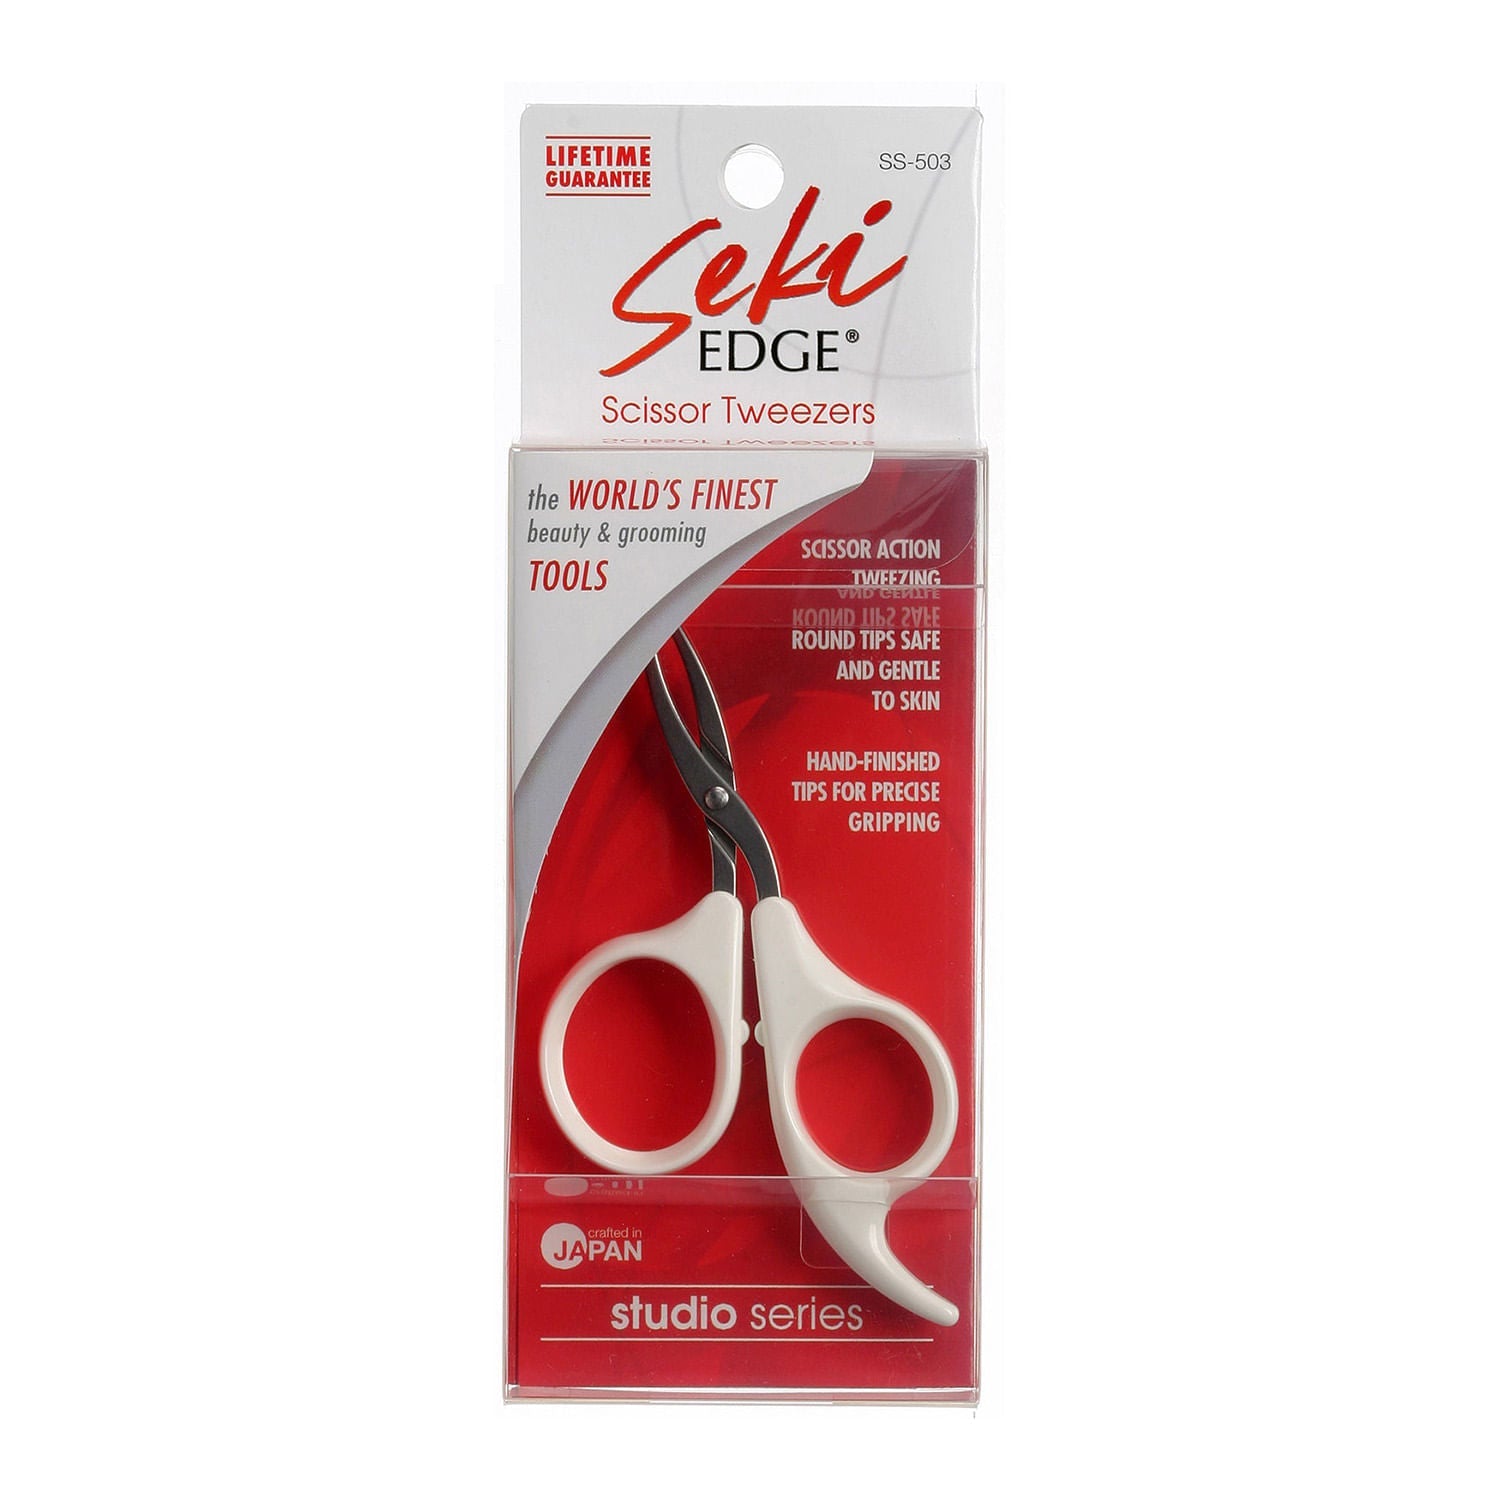 Scissor action tweezing, round tips safe and gentle to skin,hand finished precise tips for gripping. 